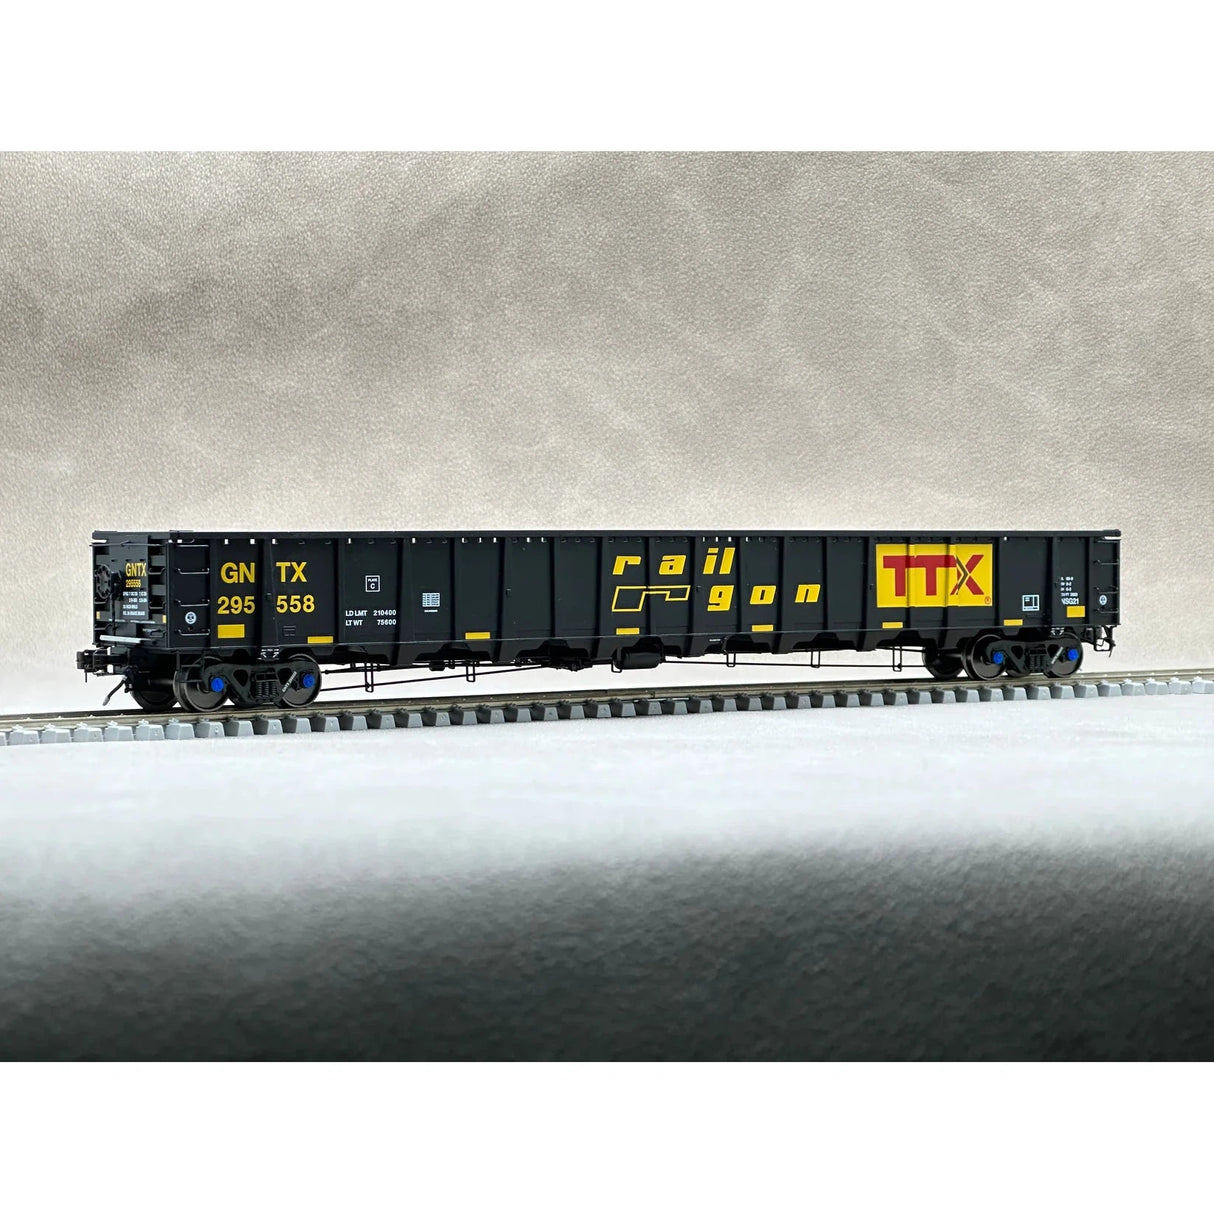 AK Interactive Products We've Used - HO Scale Customs - Model Railroad